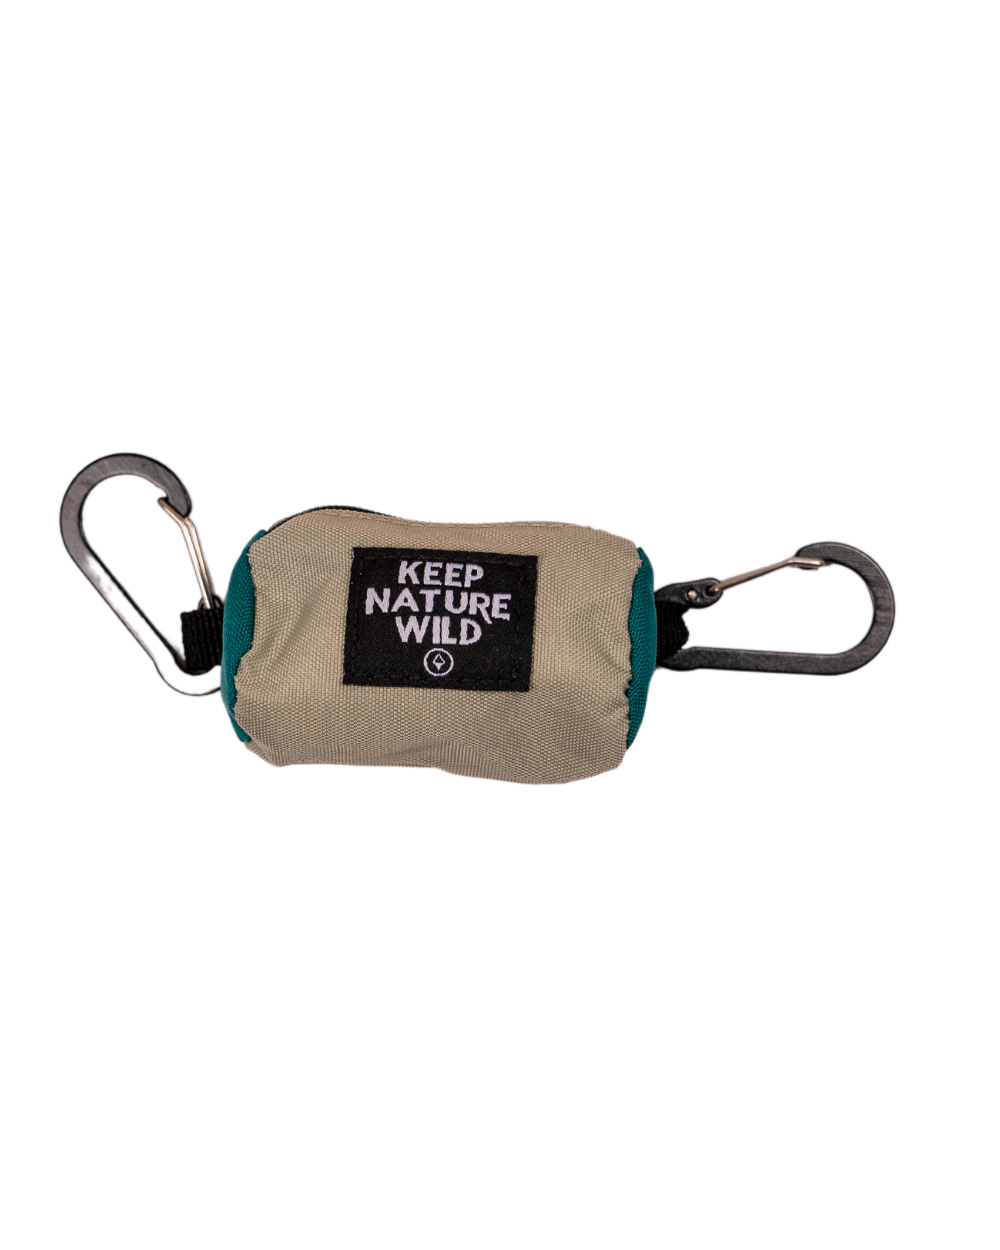 Keep Nature Wild - KNW Recycled Dog Bag Dispenser